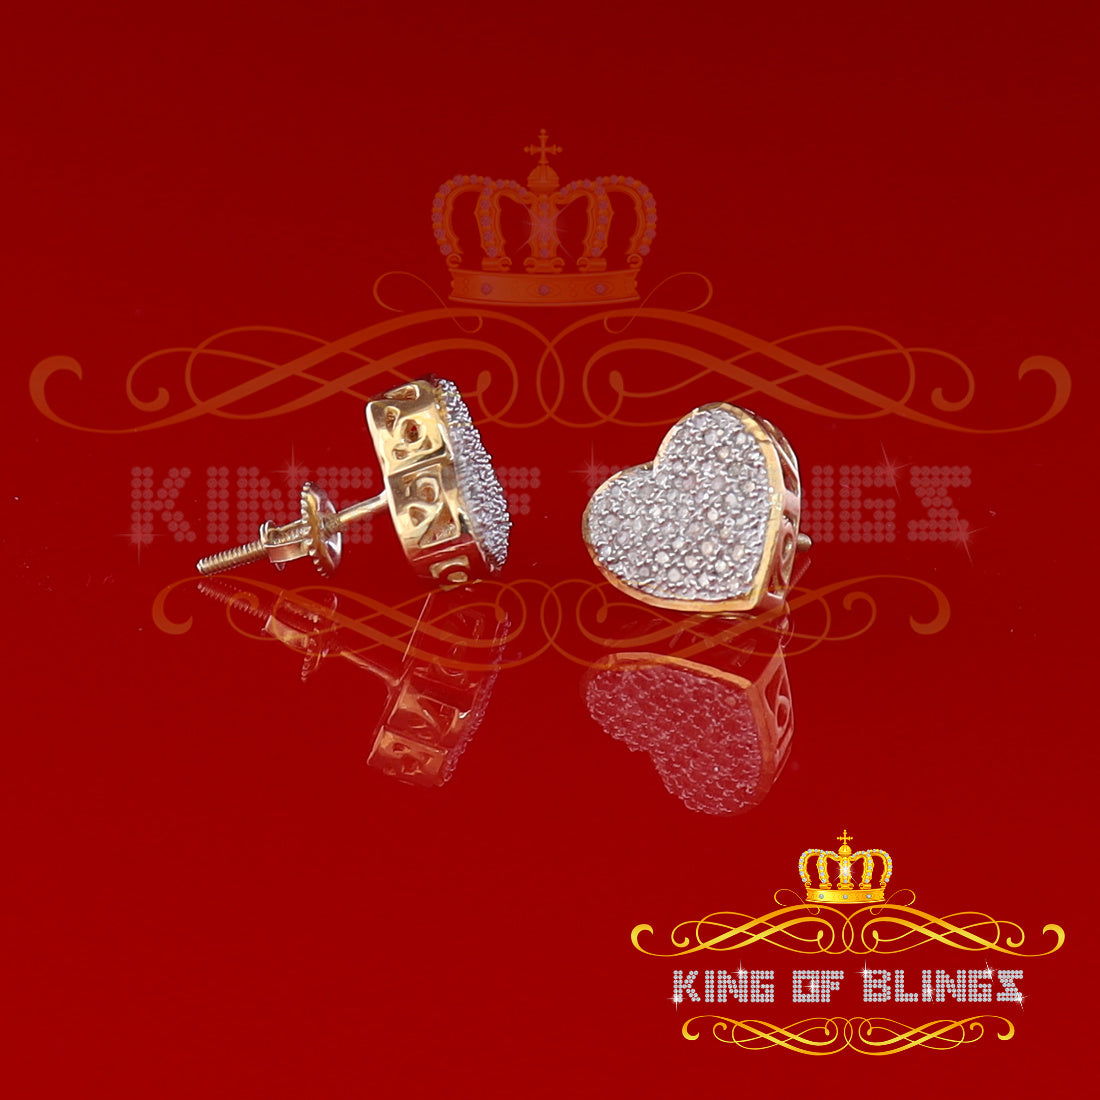 King of Blings-Aretes Para Hombre Heart 925 Yellow Silver 0.20ct Diamond Women's /Gents Earring KING OF BLINGS